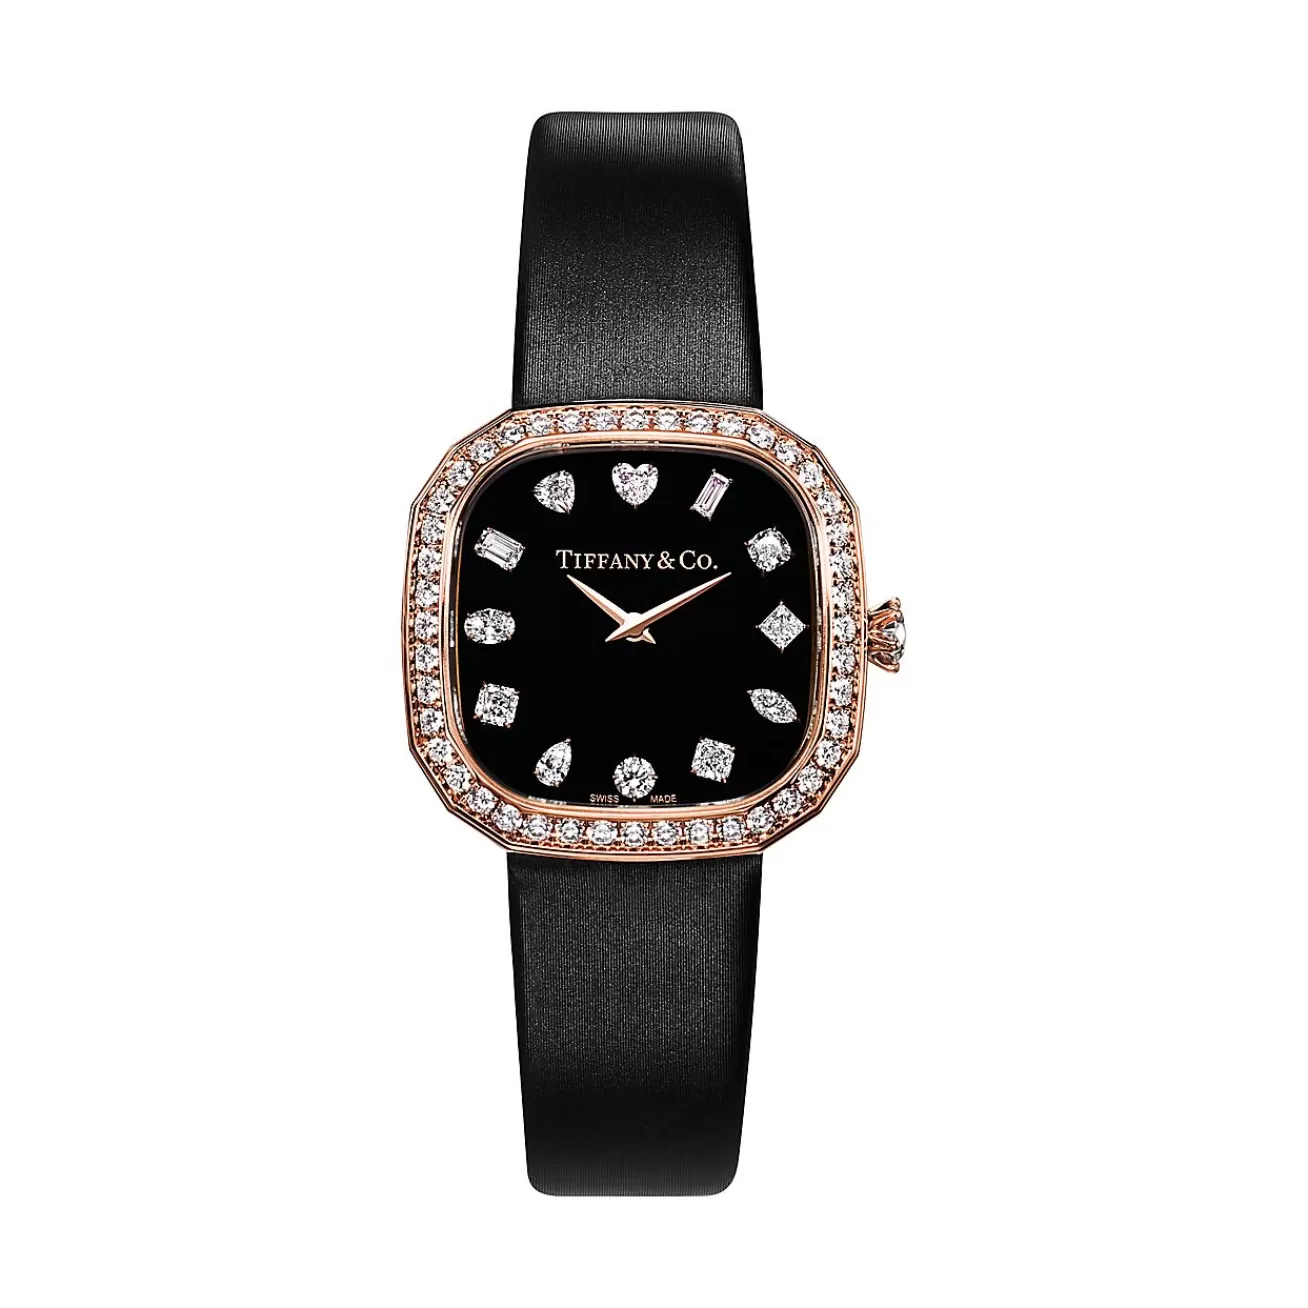 Tiffany & Co. Tiffany Eternity 28 MM Cushion-shaped Watch in Rose Gold with Diamonds | ^Women Fine Watches | Women’s Watches